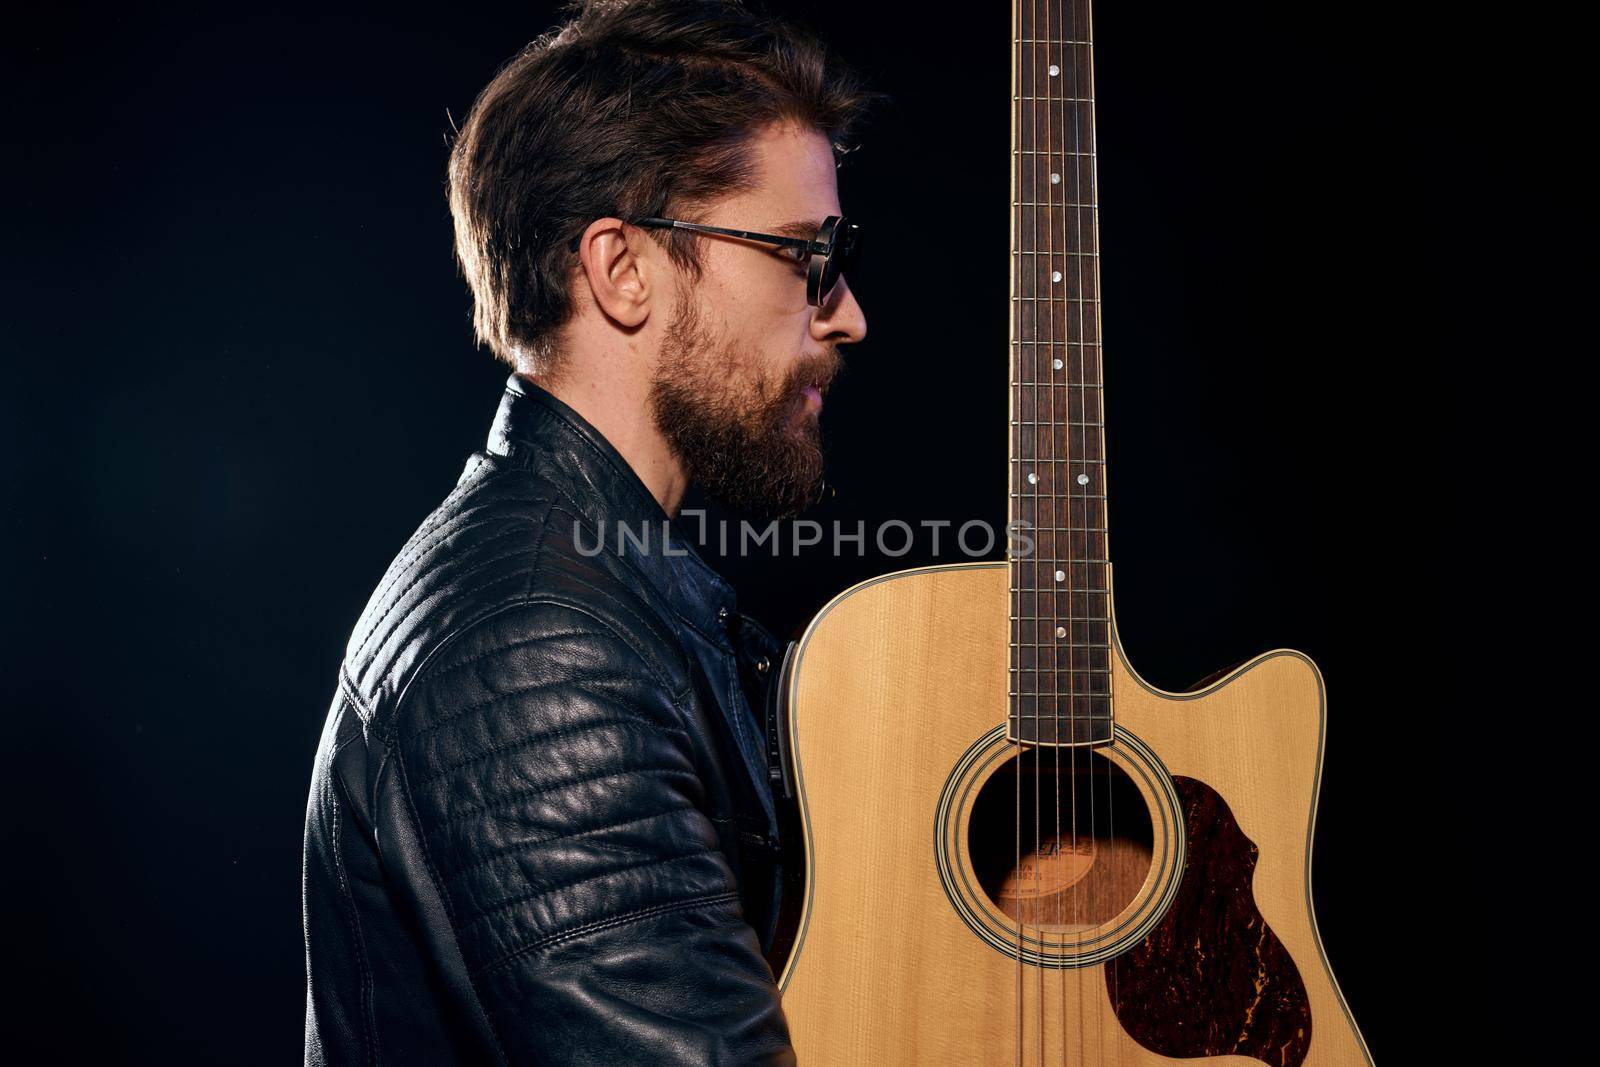 A man with a guitar in his hands leather jacket music performance rock star modern style dark background by SHOTPRIME